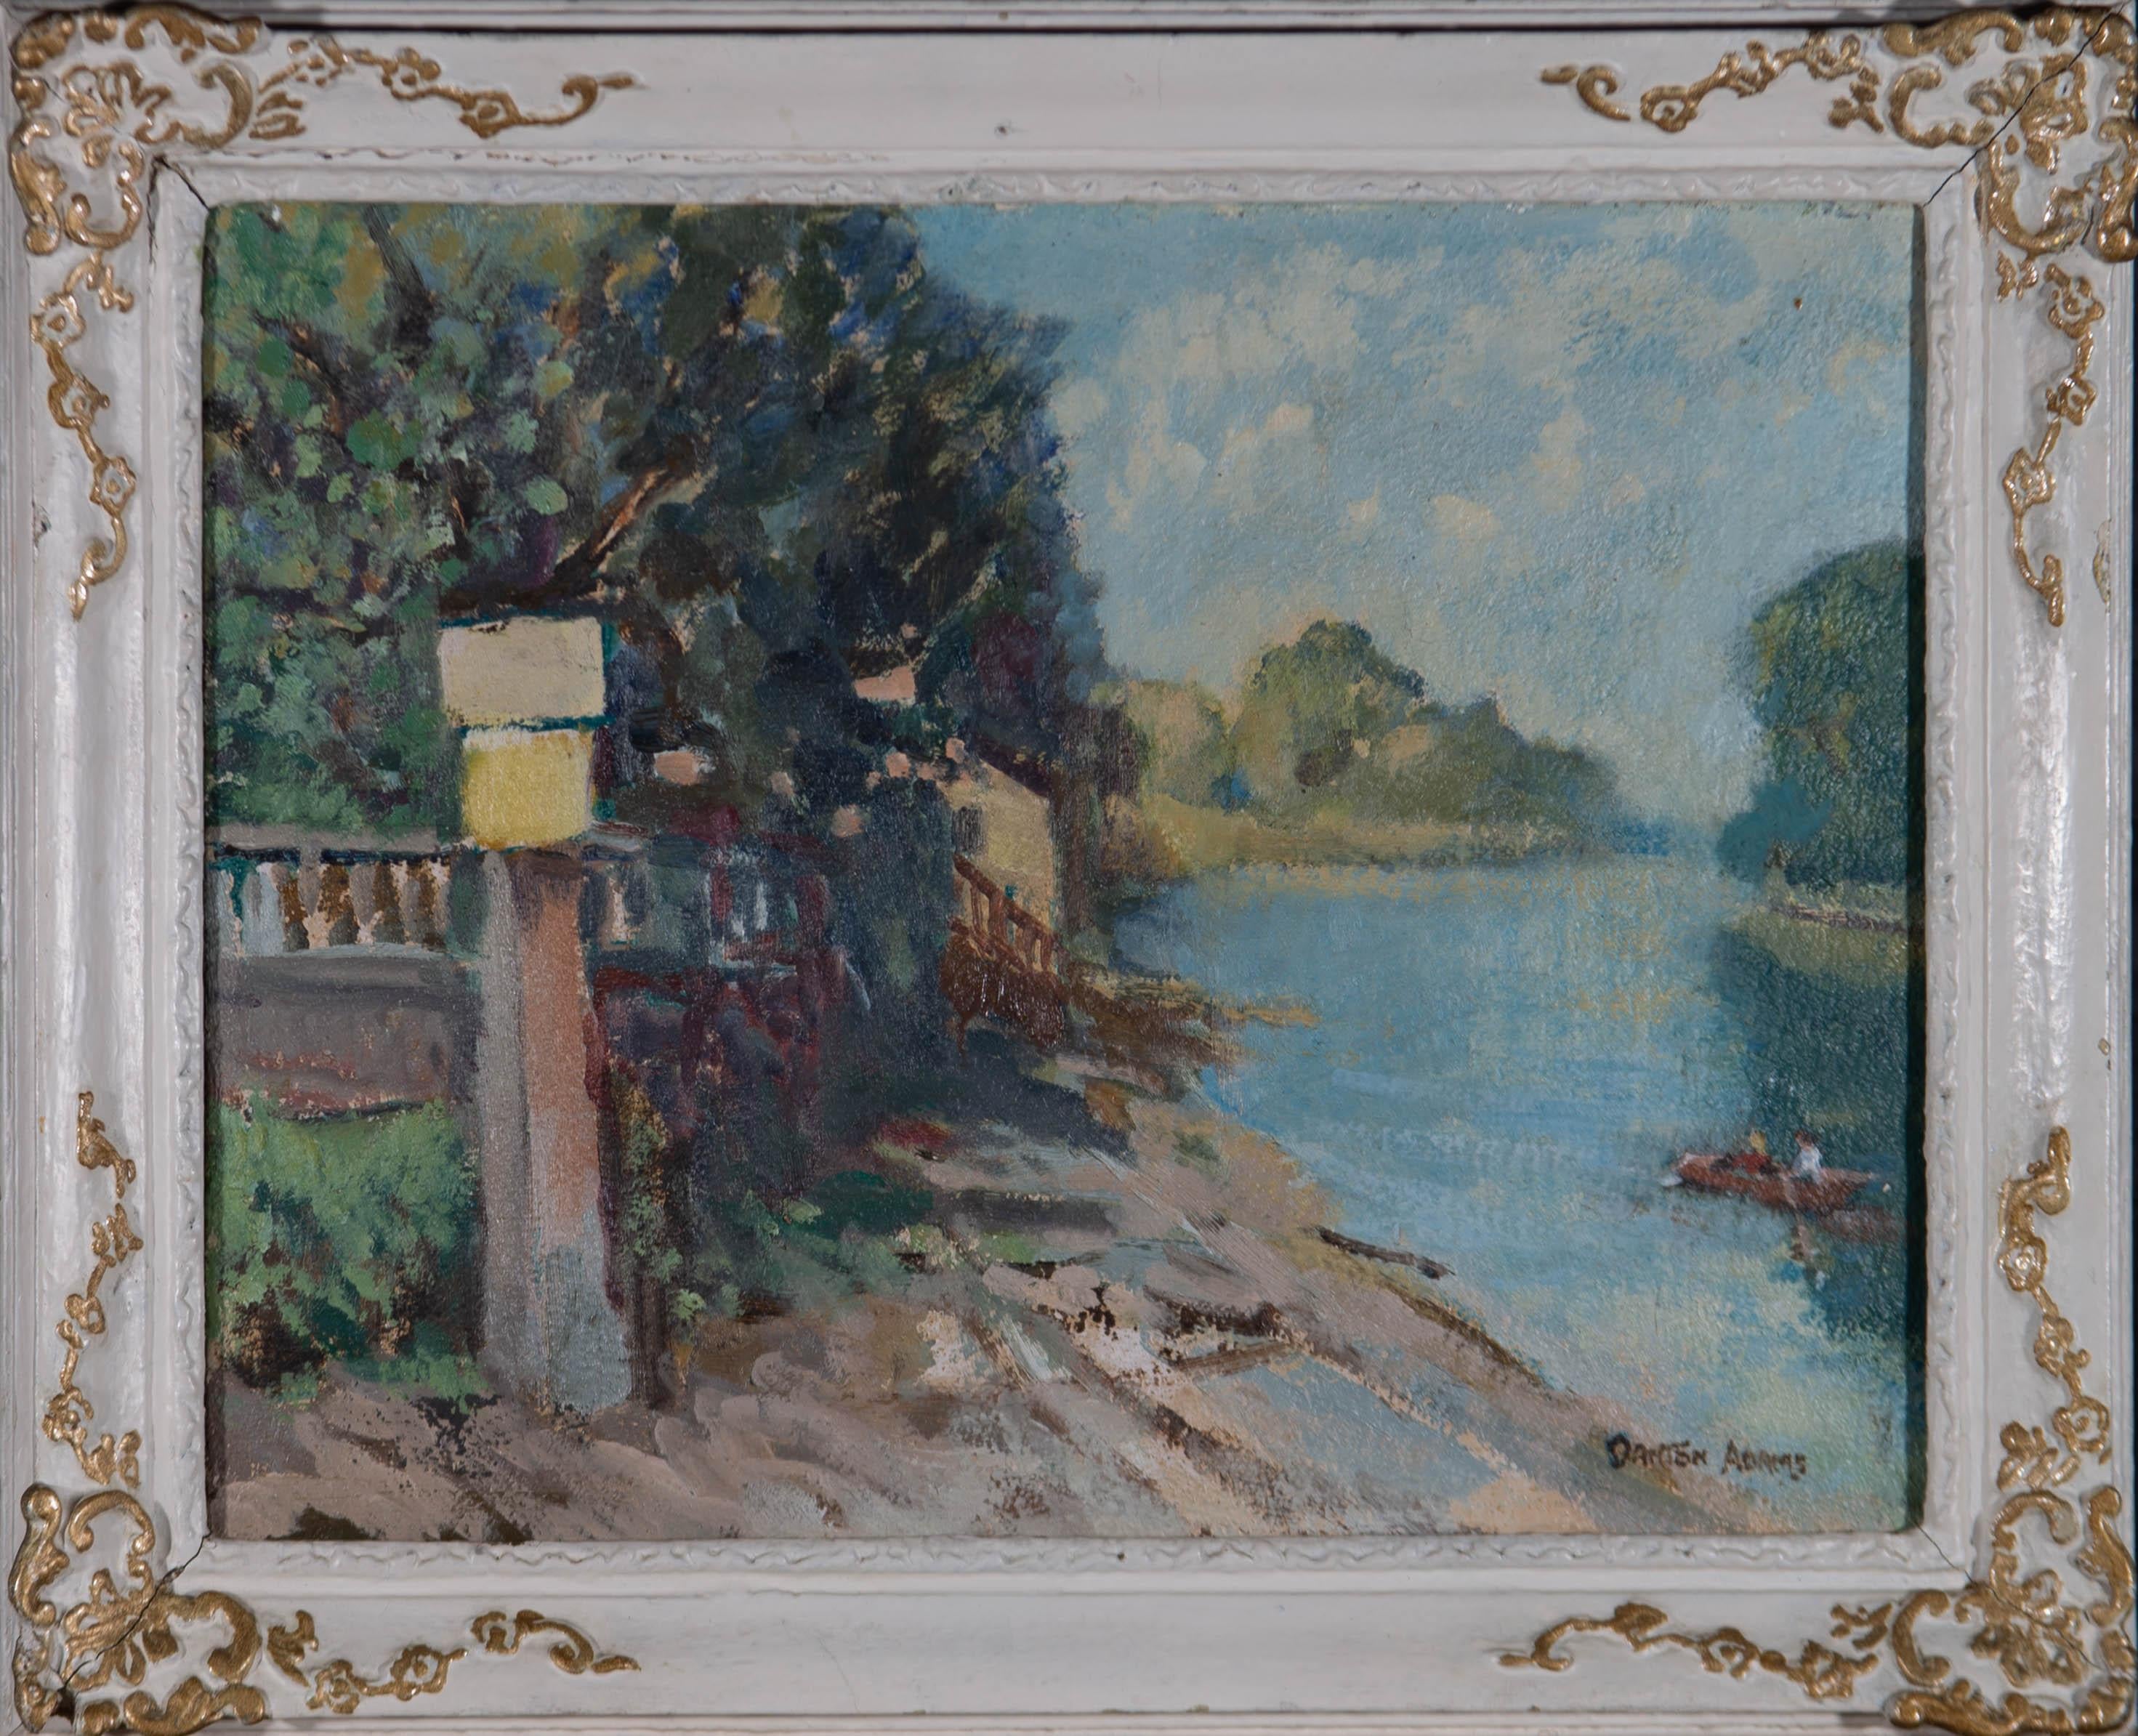 A idyllic mid Century Impressionist oil showing a lazy river scene, with two figures in a rowing boat, floating along under the blue Summer sky. The painting has been signed in the lower right corner and presented in a mid Century white frame with